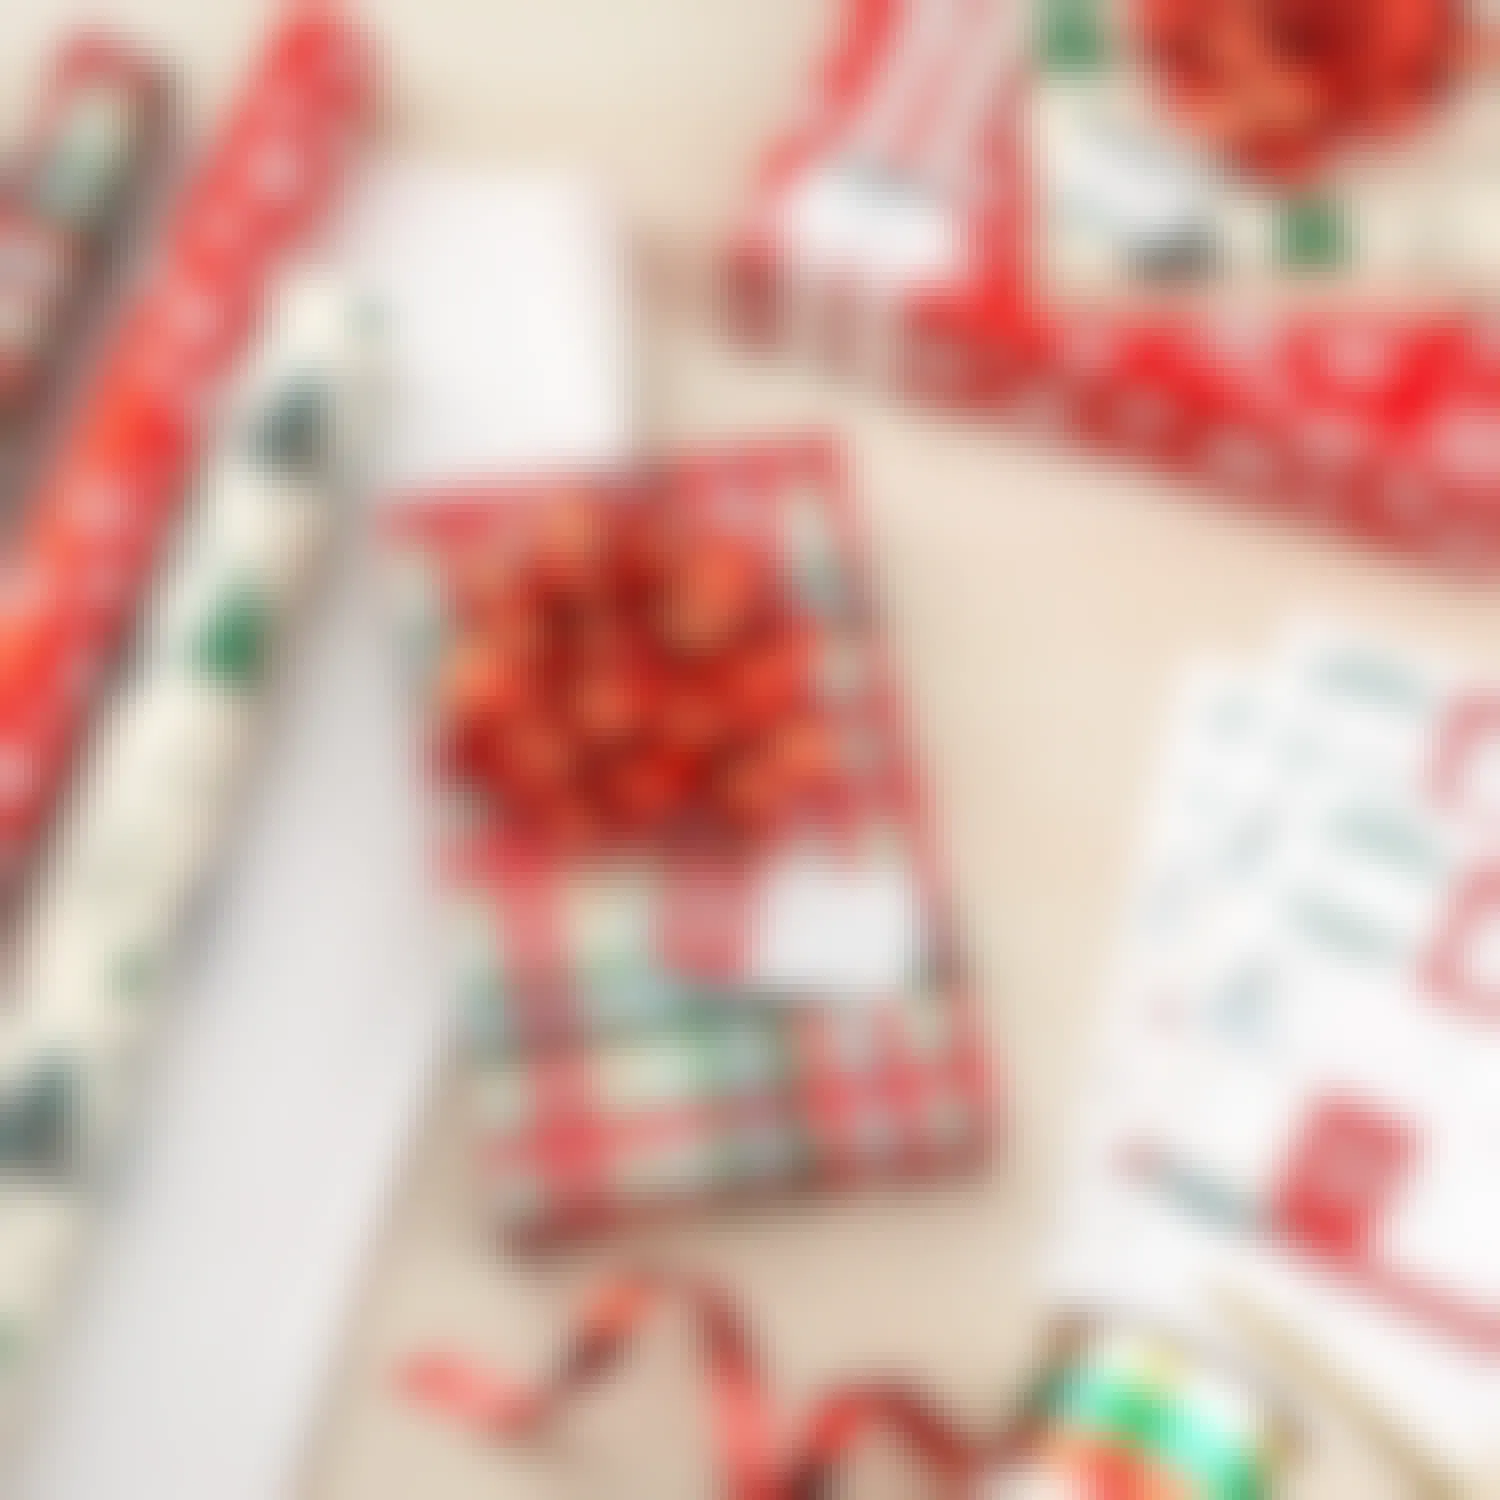 Where to Shop for the Best Deals on Wrapping Paper